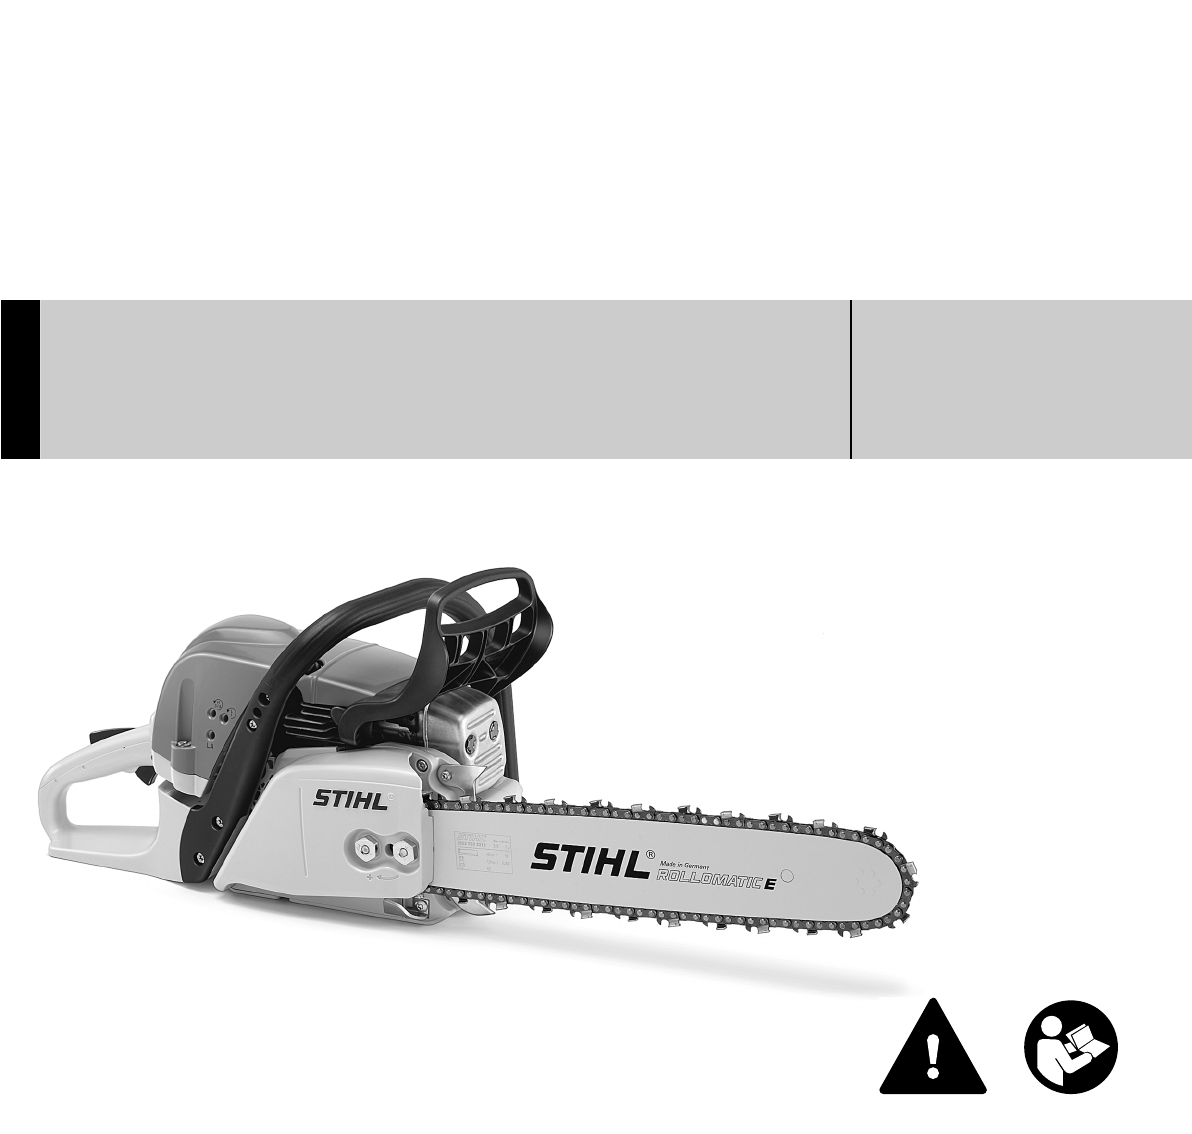 Ms 311 stihl review